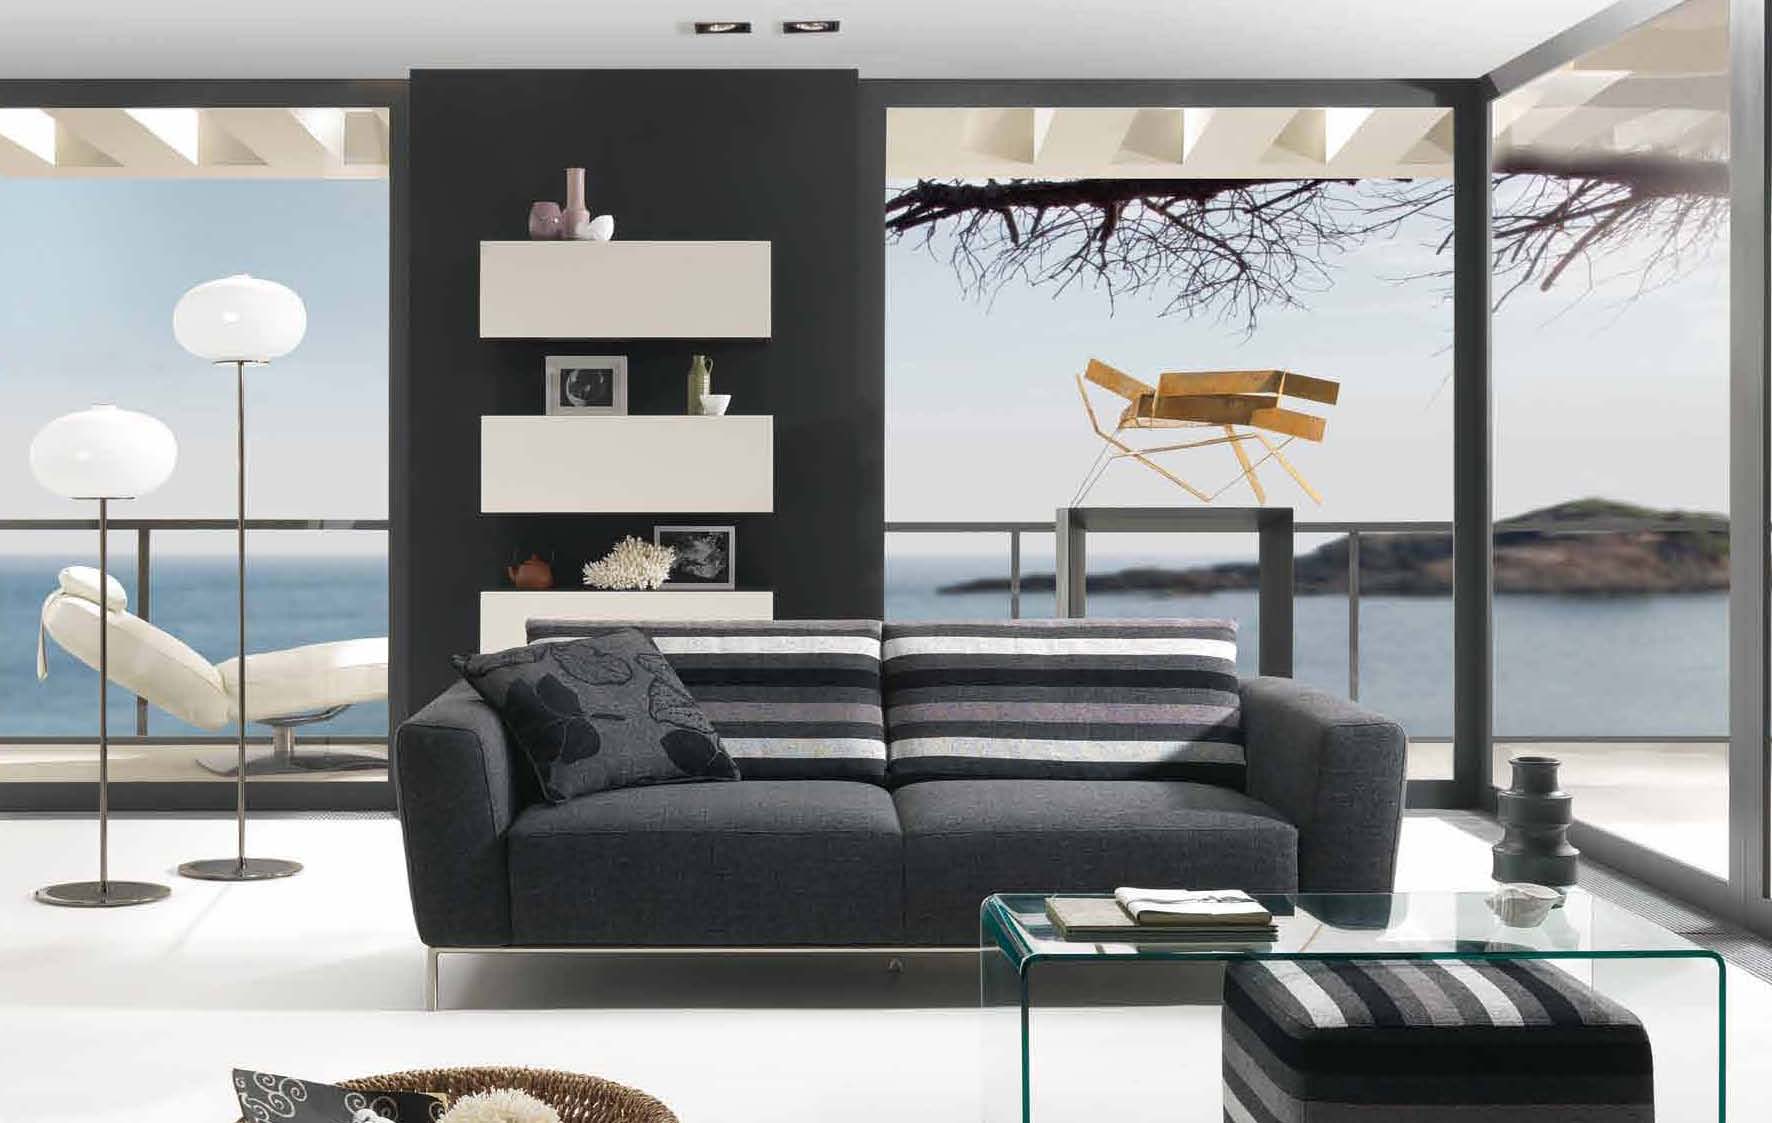 Contemporary Living Clear Astonishing Contemporary Living Room Applying Clear Glass Wall Furnished With Flooring Stand Lamps And Wall Cabinet Completed With Black Sofa And Ghost Table Living Room Attractive Contemporary Living Room Design